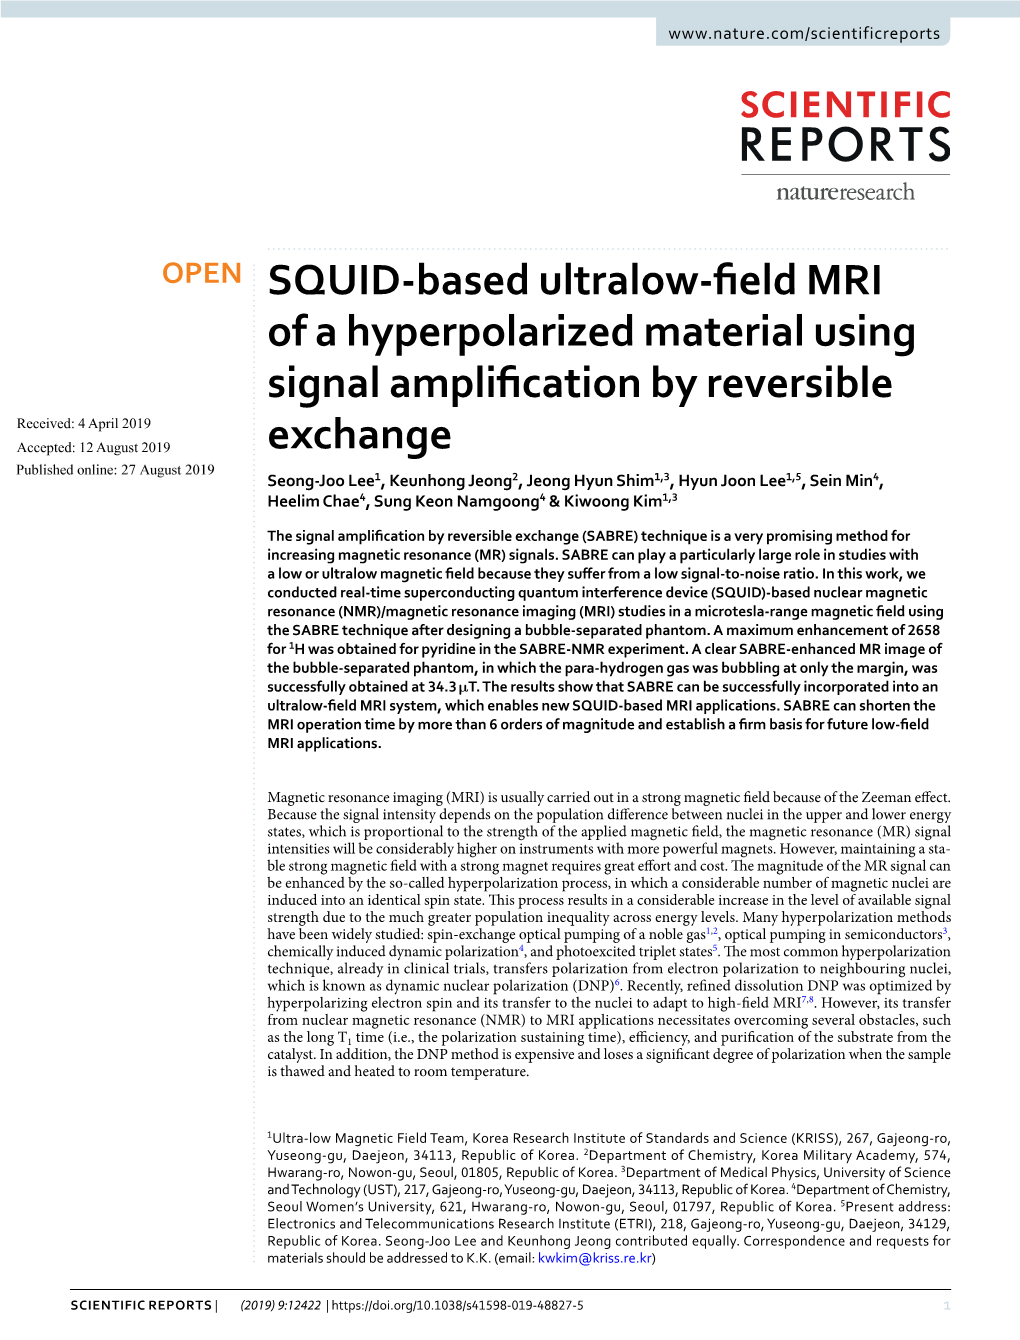 SQUID-Based Ultralow-Field MRI of a Hyperpolarized Material Using